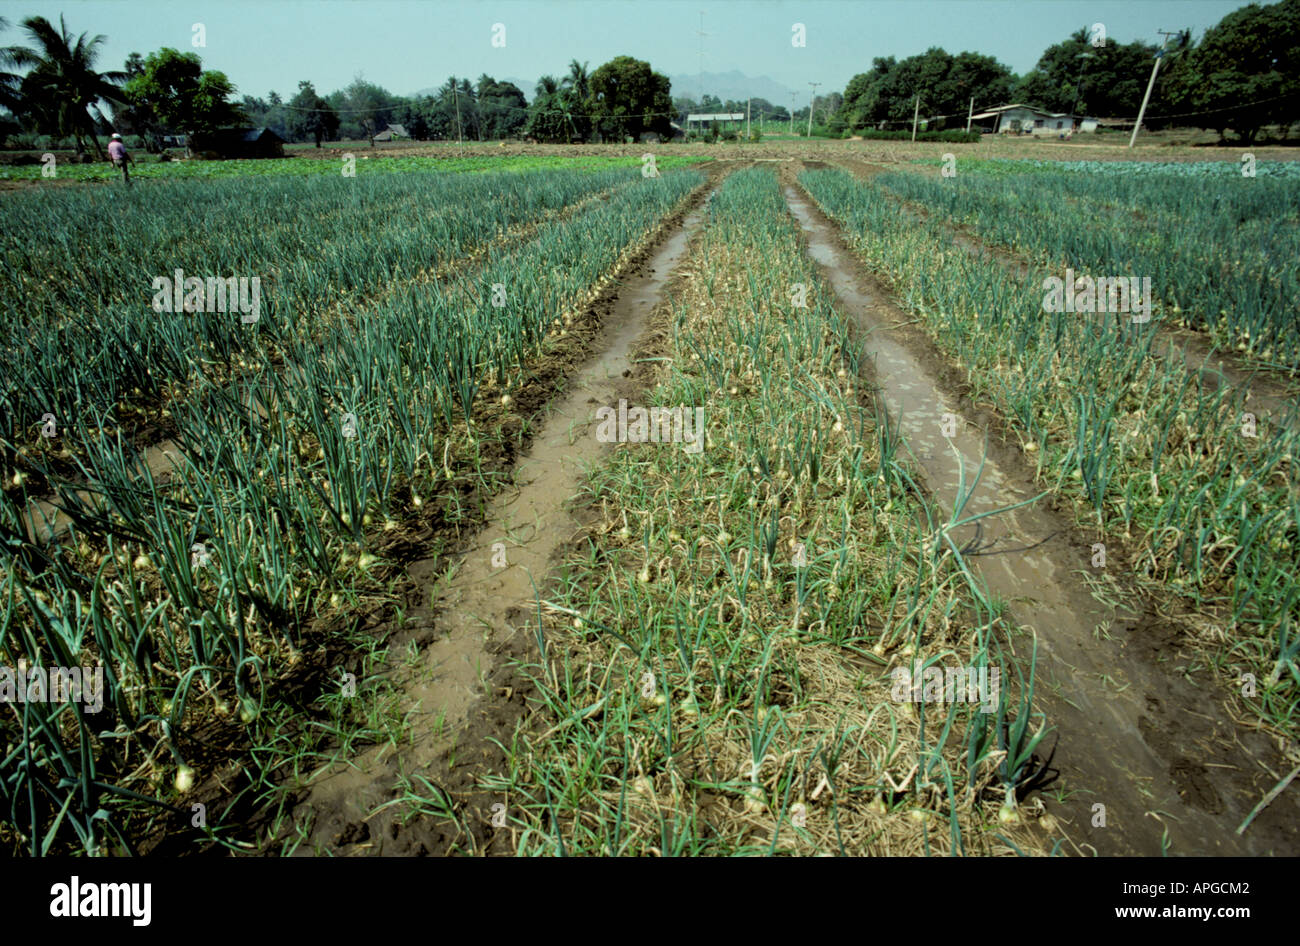 Onion plots showing damage caused by bacterial blight Xanthomonas campestris Thailand Stock Photo